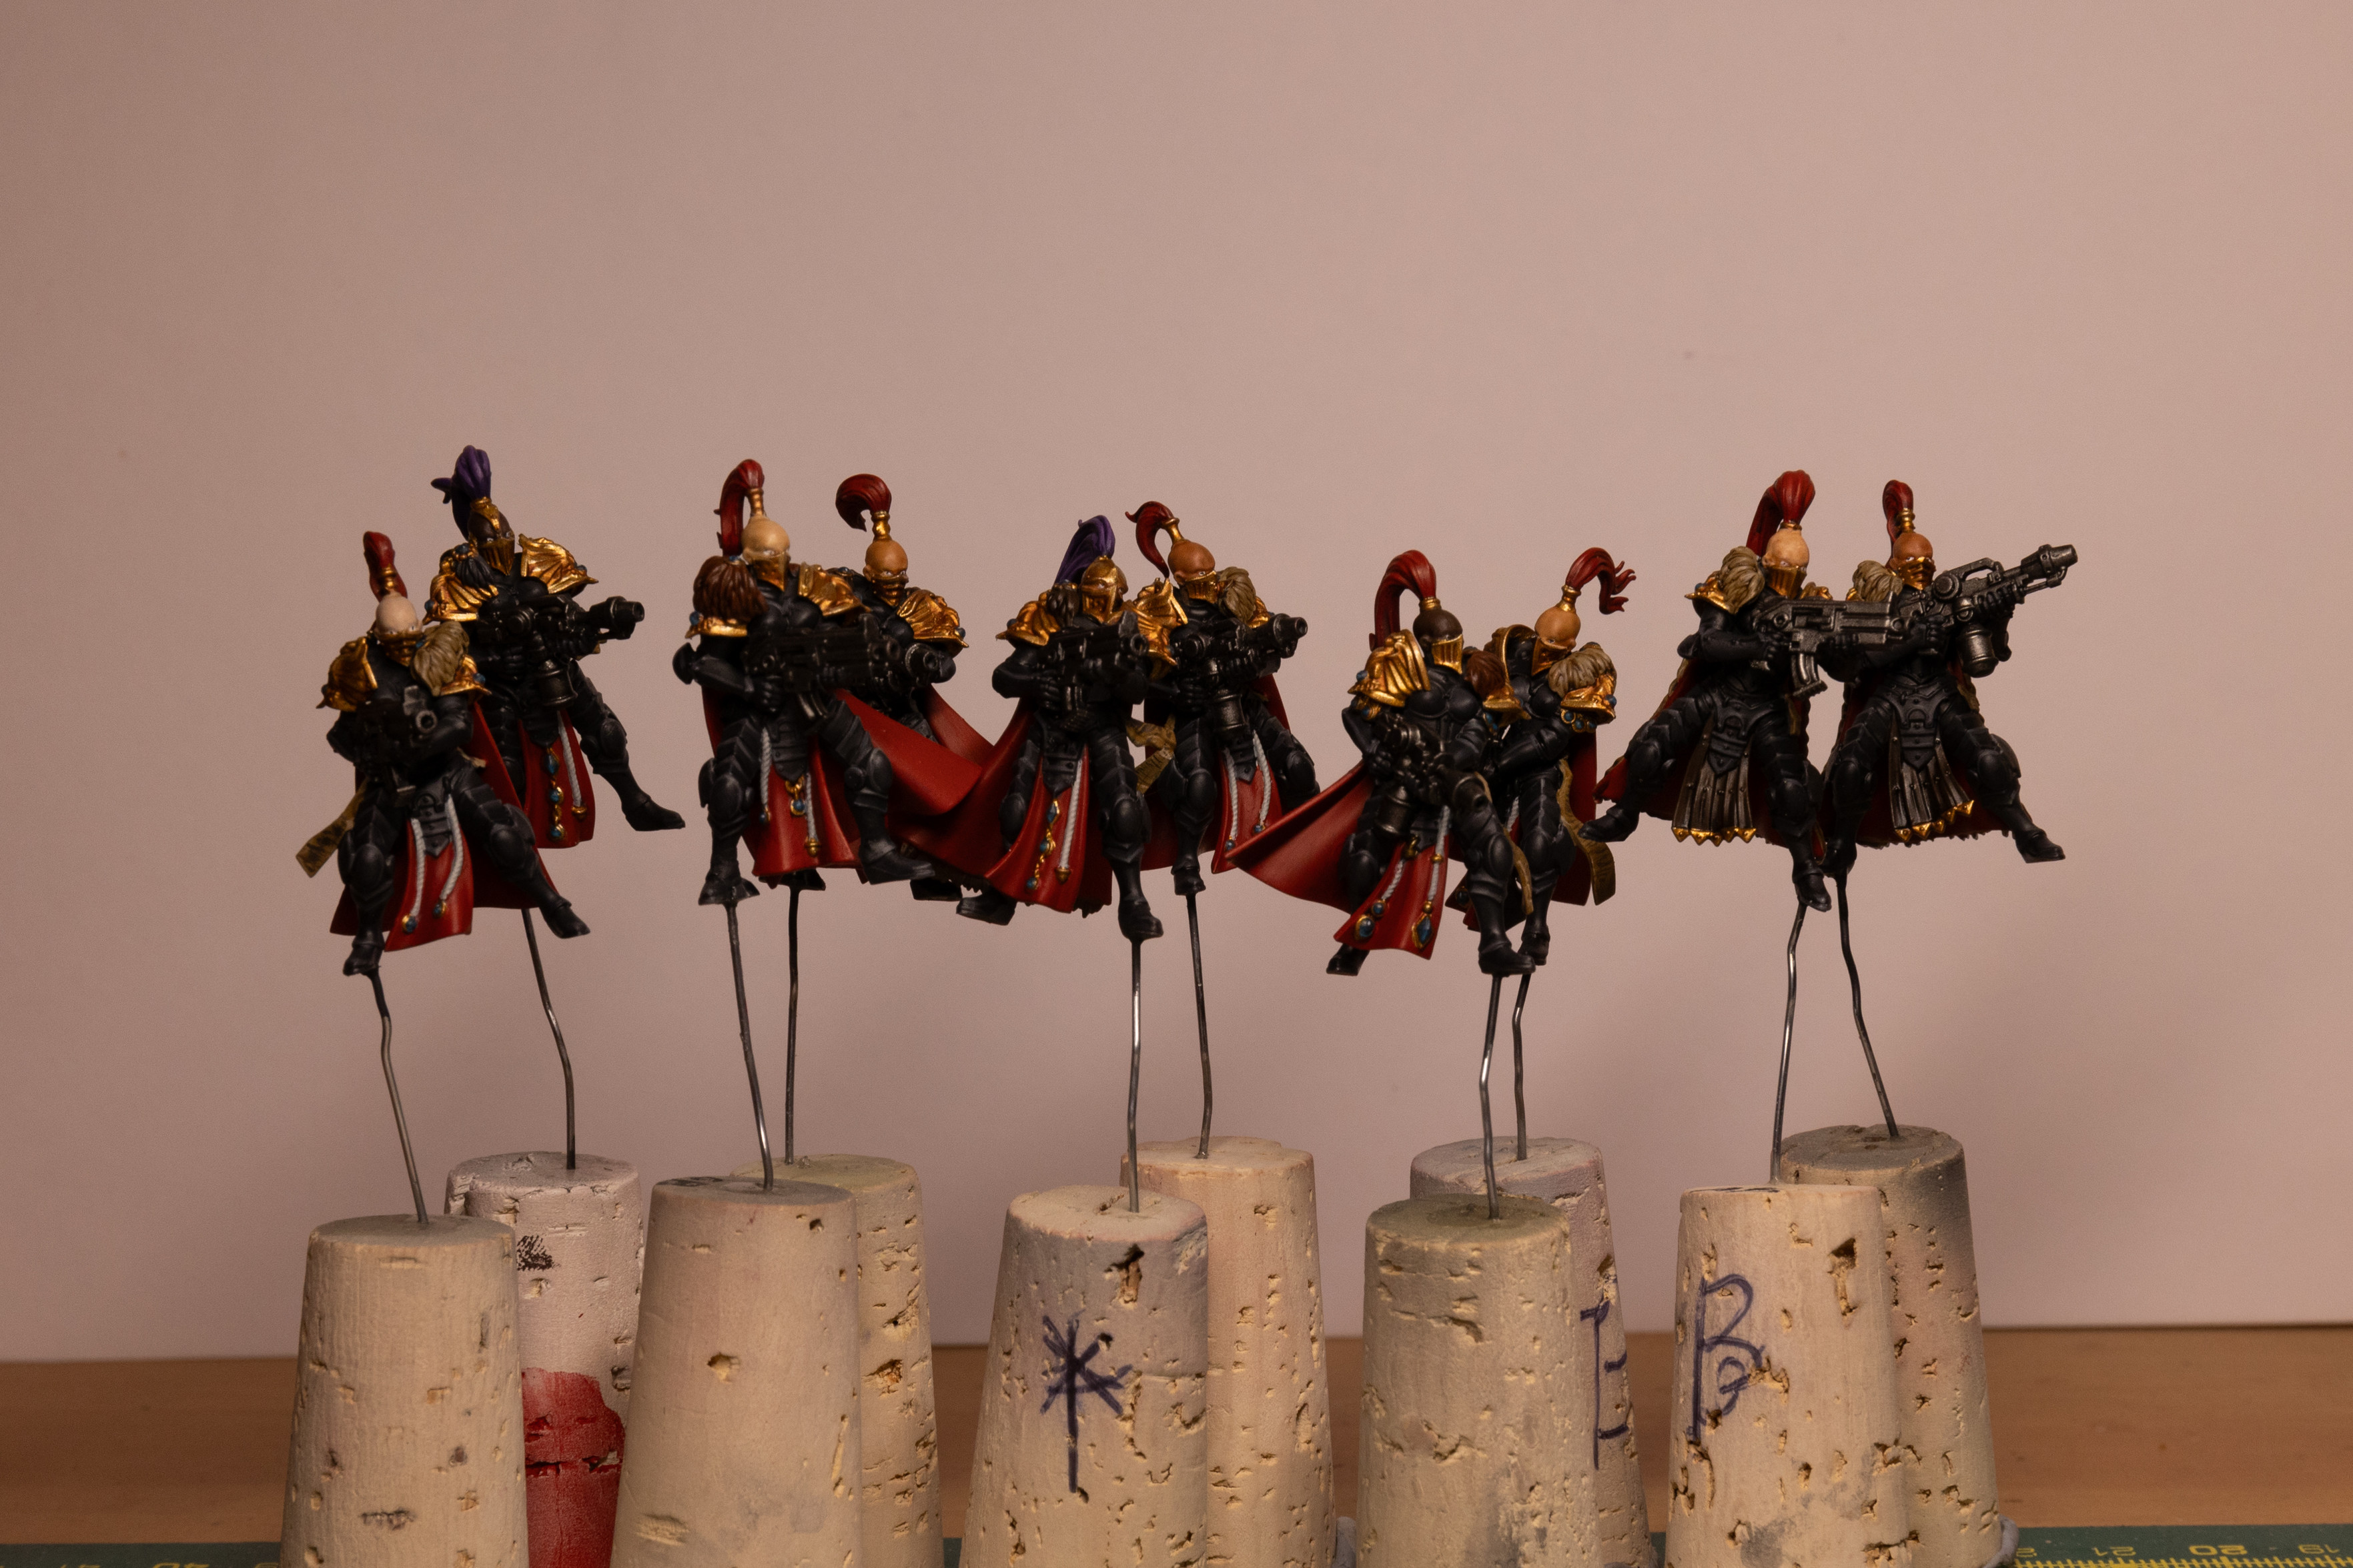 Ten Warhammer 40k Sisters of Silence in Shadowkeepers colour scheme. They are female warriors in black armour with gold trim and red capes/plumes. They are bald bar a long plume of hair in a top knot held in place with gold jewellery. Two of the plumes are purple. The are all mounted on metal sticks and corks with various letters and markings on them.